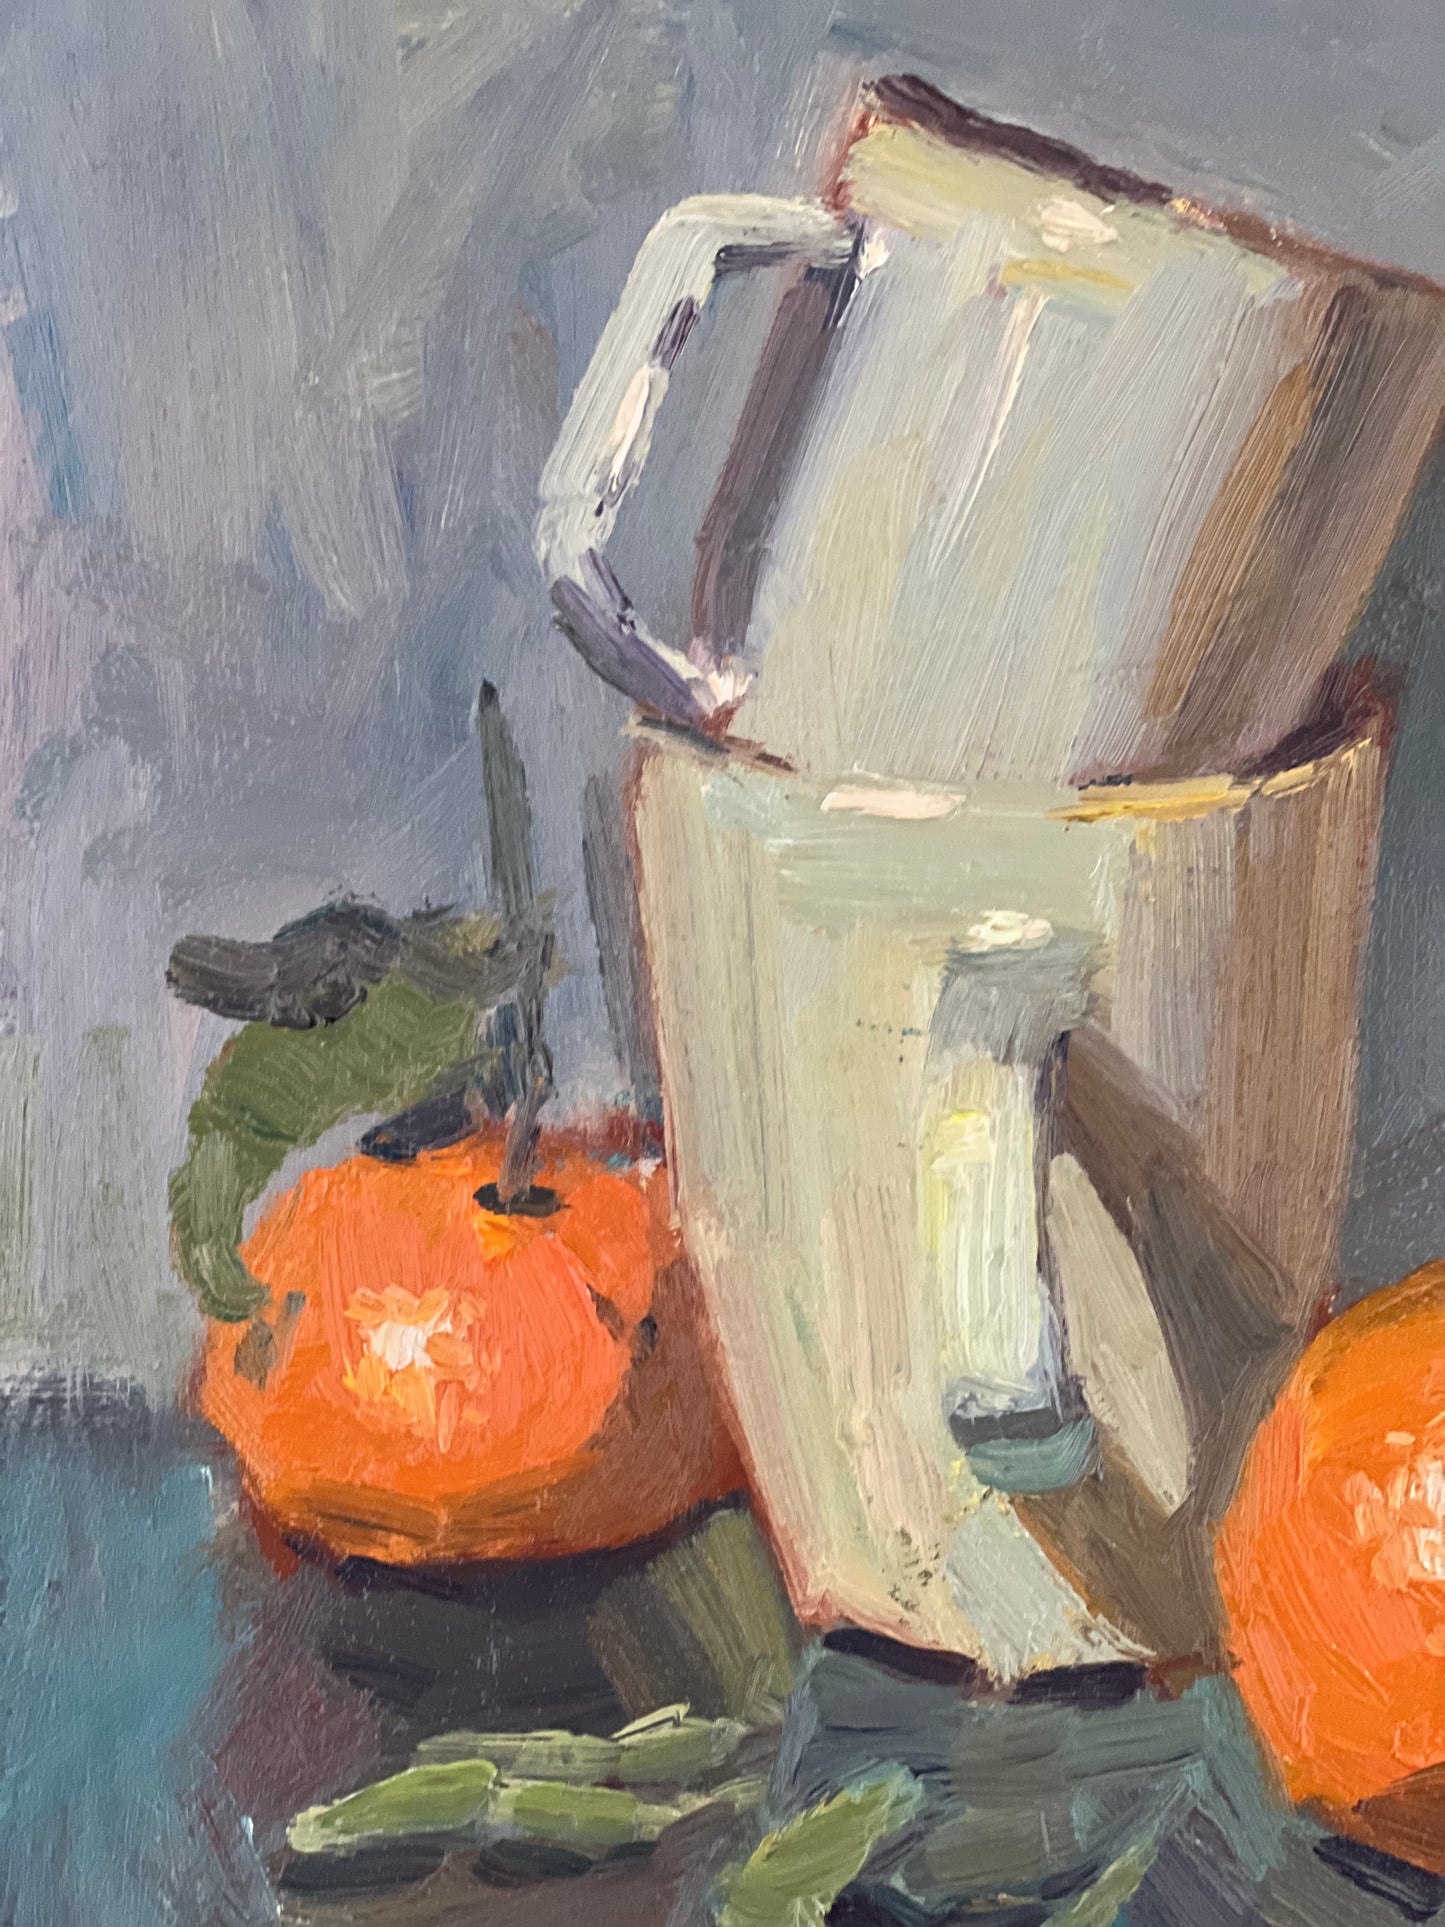 Oranges and Cups 2 - Still Life Oil Painting